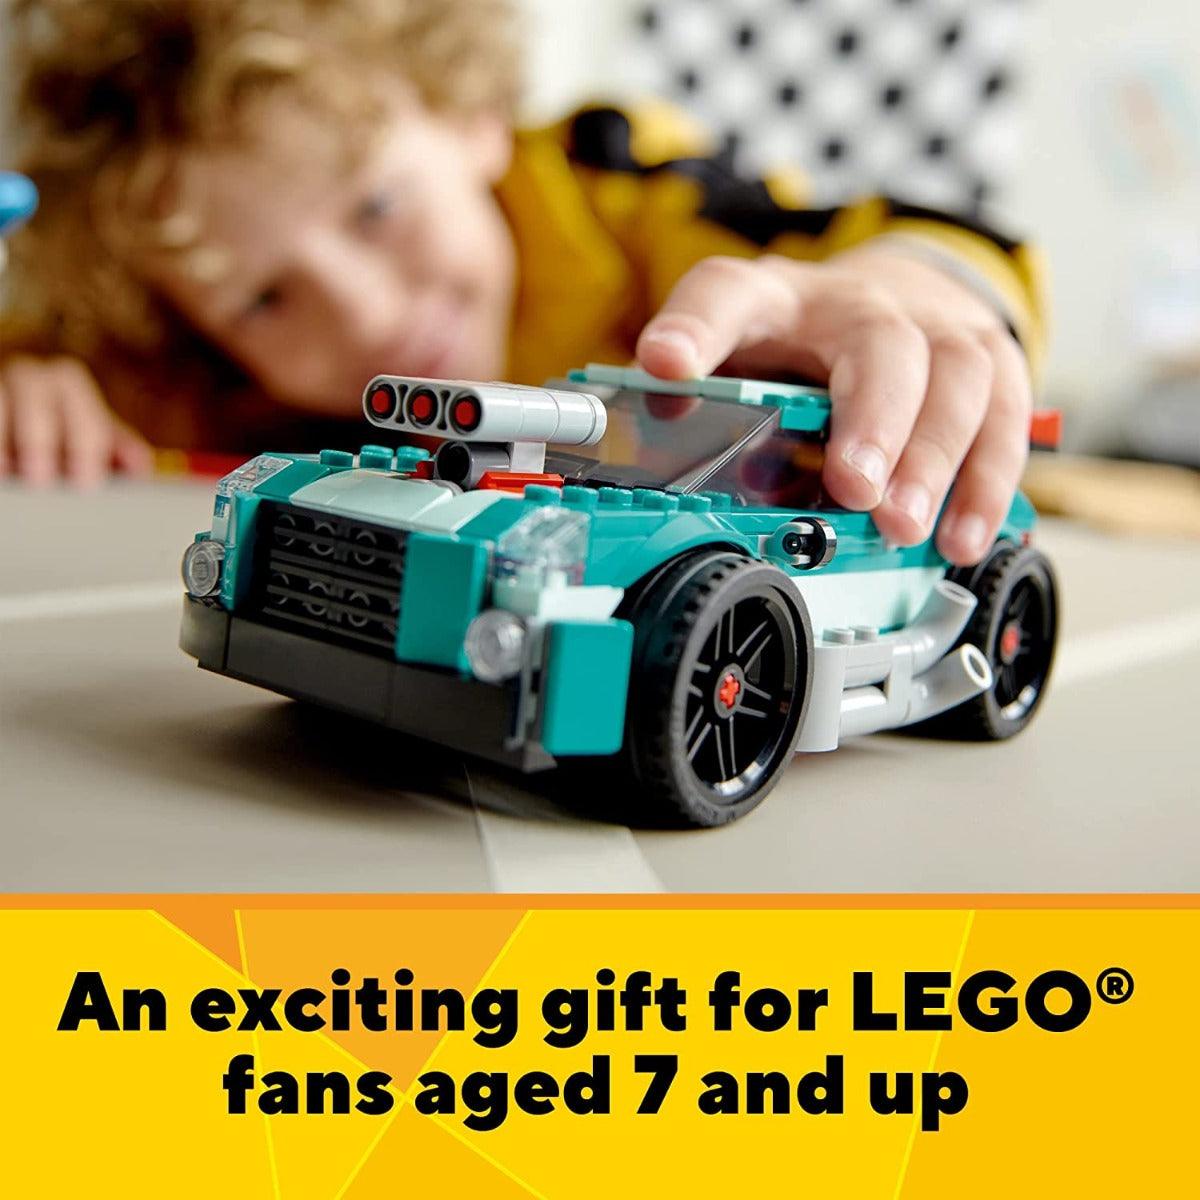 LEGO Creator 3in1 Street Racer Building Kit for Ages 7+